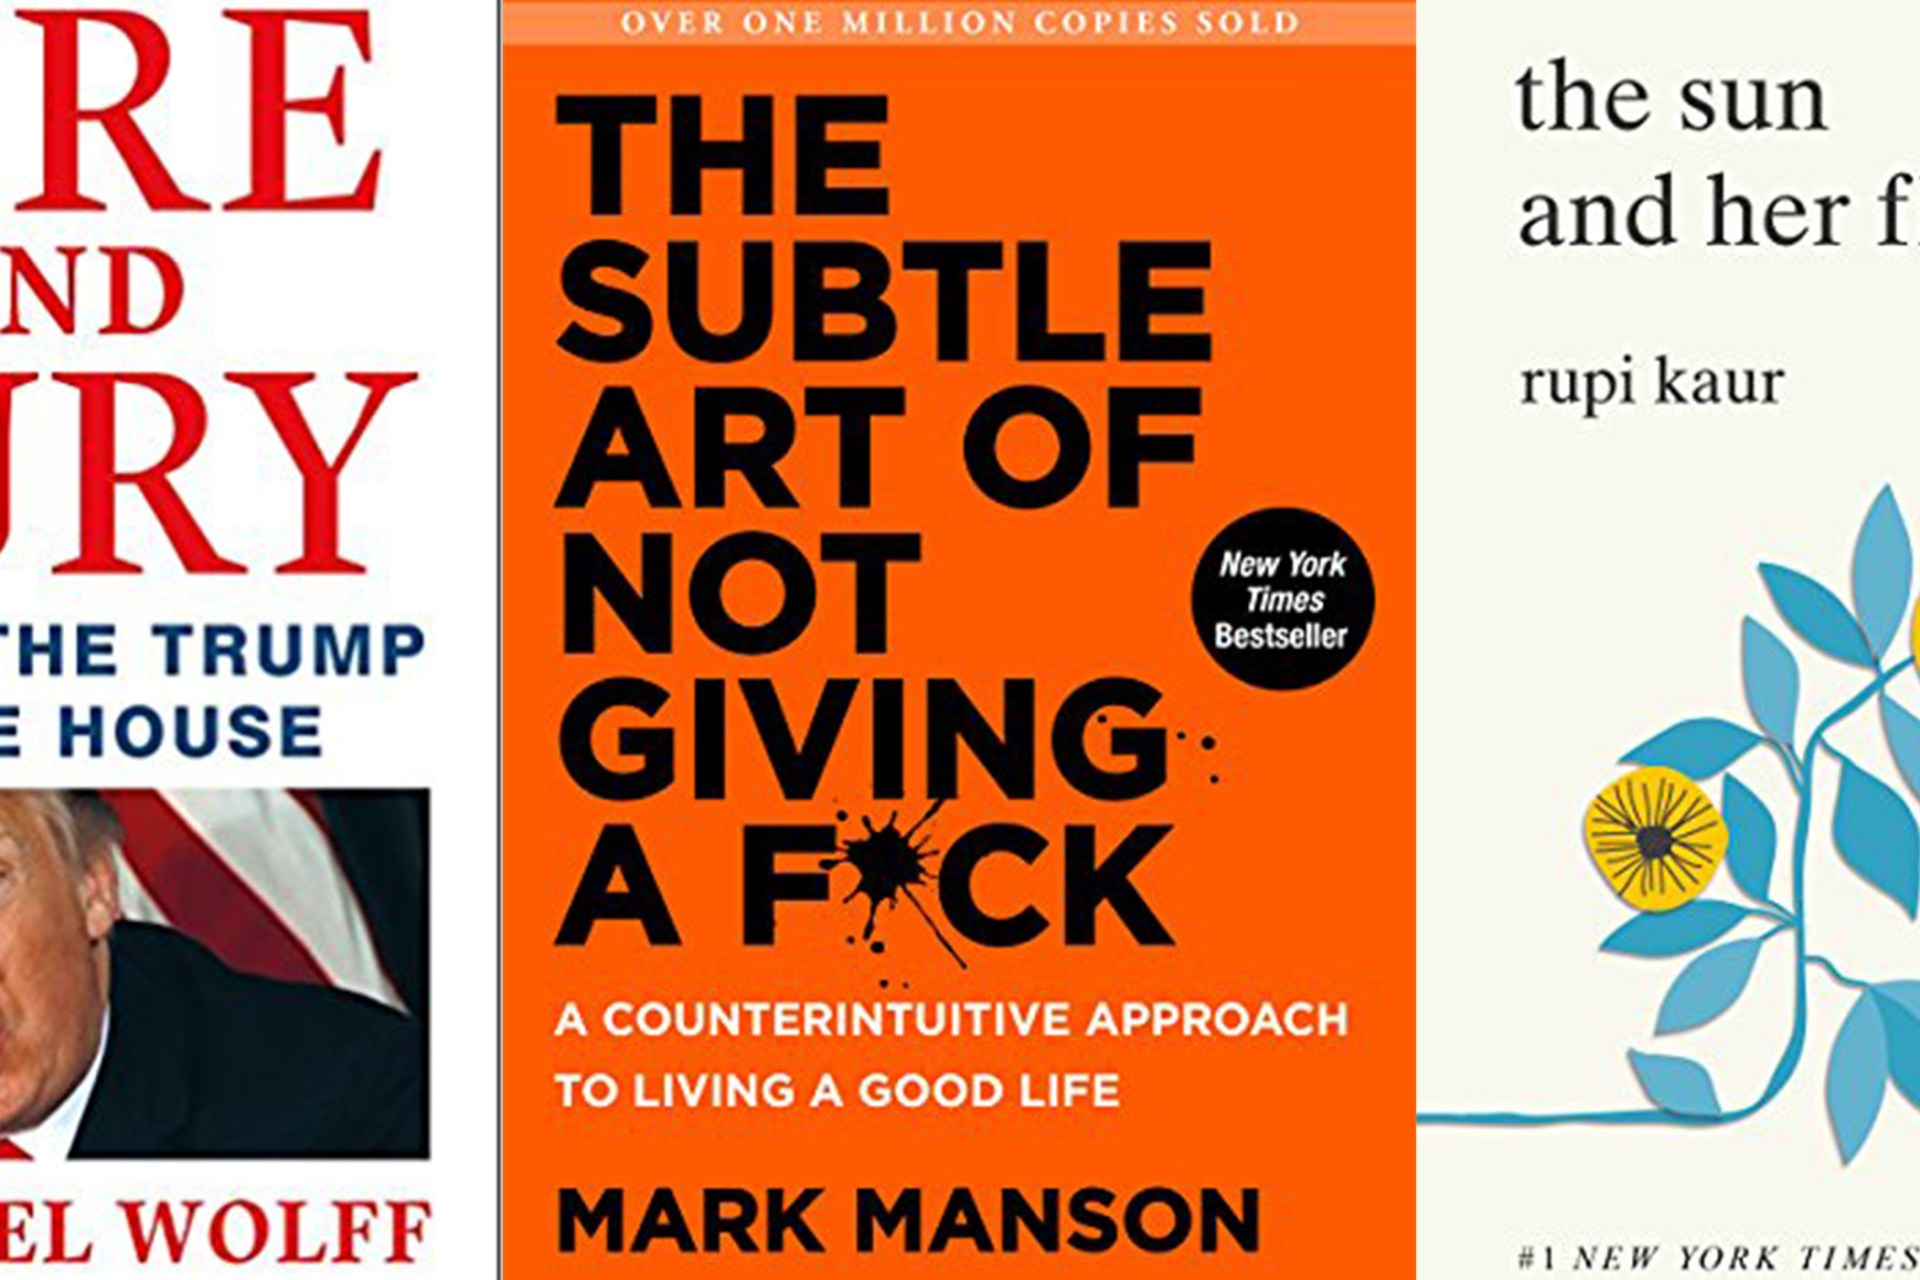 Bestselling books of 2018